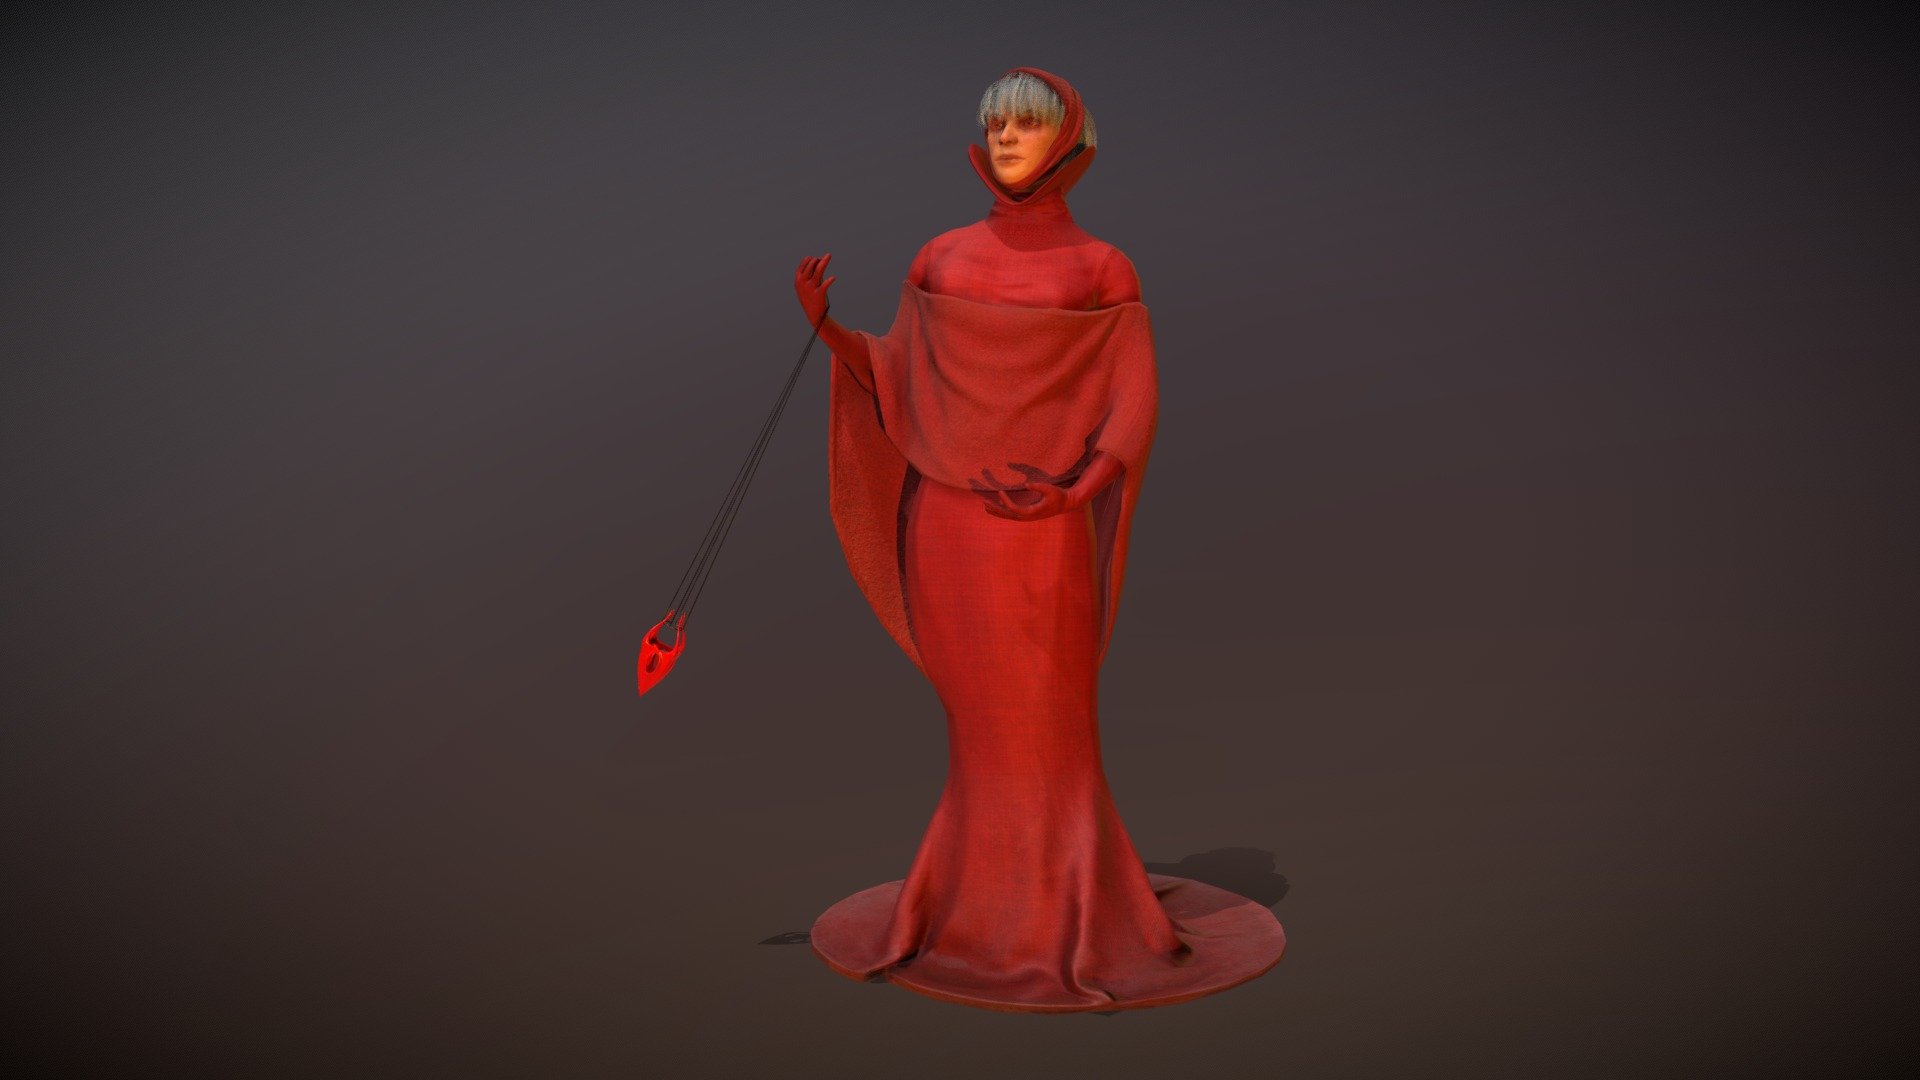 Character design and production for university organic modelling module. I chose to go with the theme of &lsquo;Sith formal wear'.

Concepts and WIP can be found on my artstation:
https://www.artstation.com/artwork/xYEKbR
https://www.artstation.com/artwork/1403oq - The Cardinal - Game Ready Sith Character Design - 3D model by Beck Hemsley (@beckh) 3d model